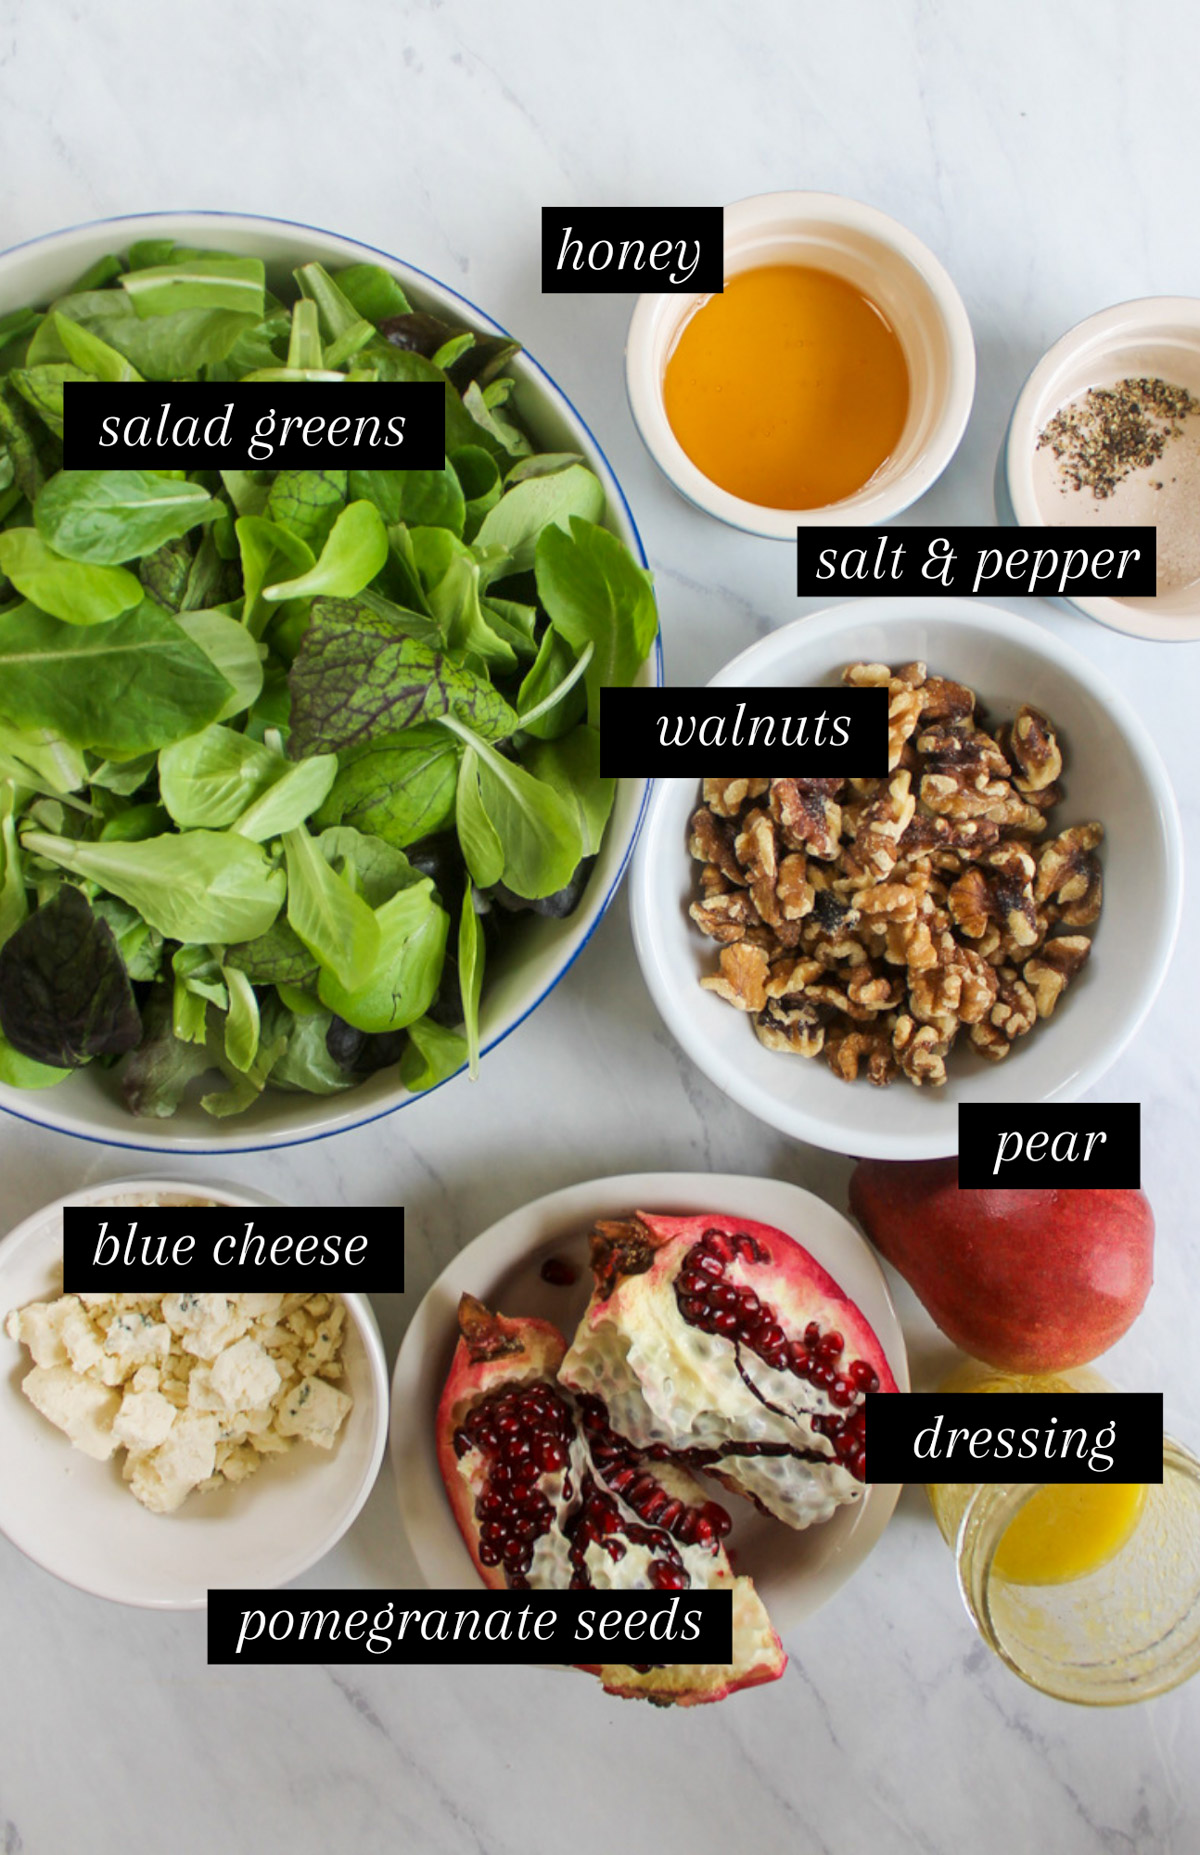 Labeled ingredients for pear and blue cheese salad.